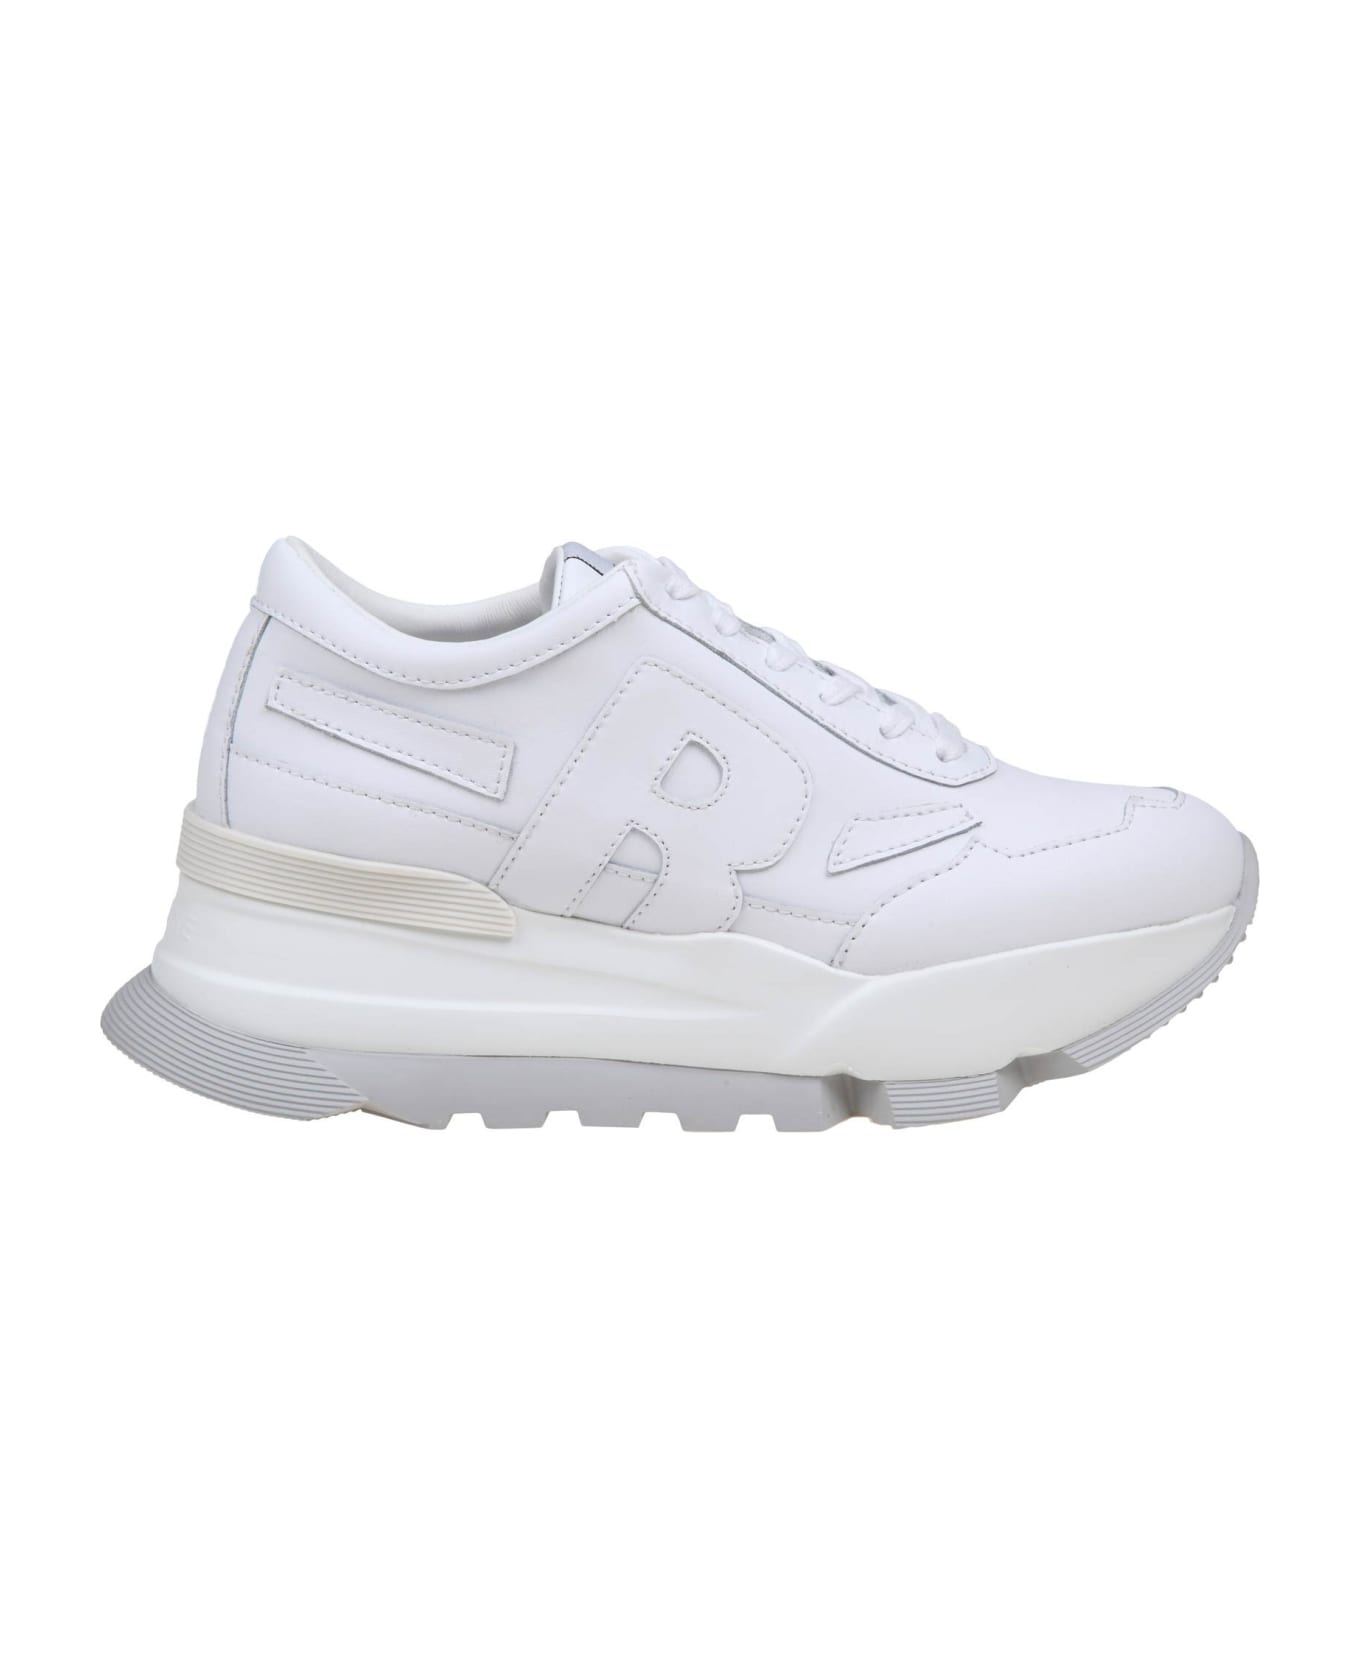 Ruco Line White Leather Sneakers - White / Gold